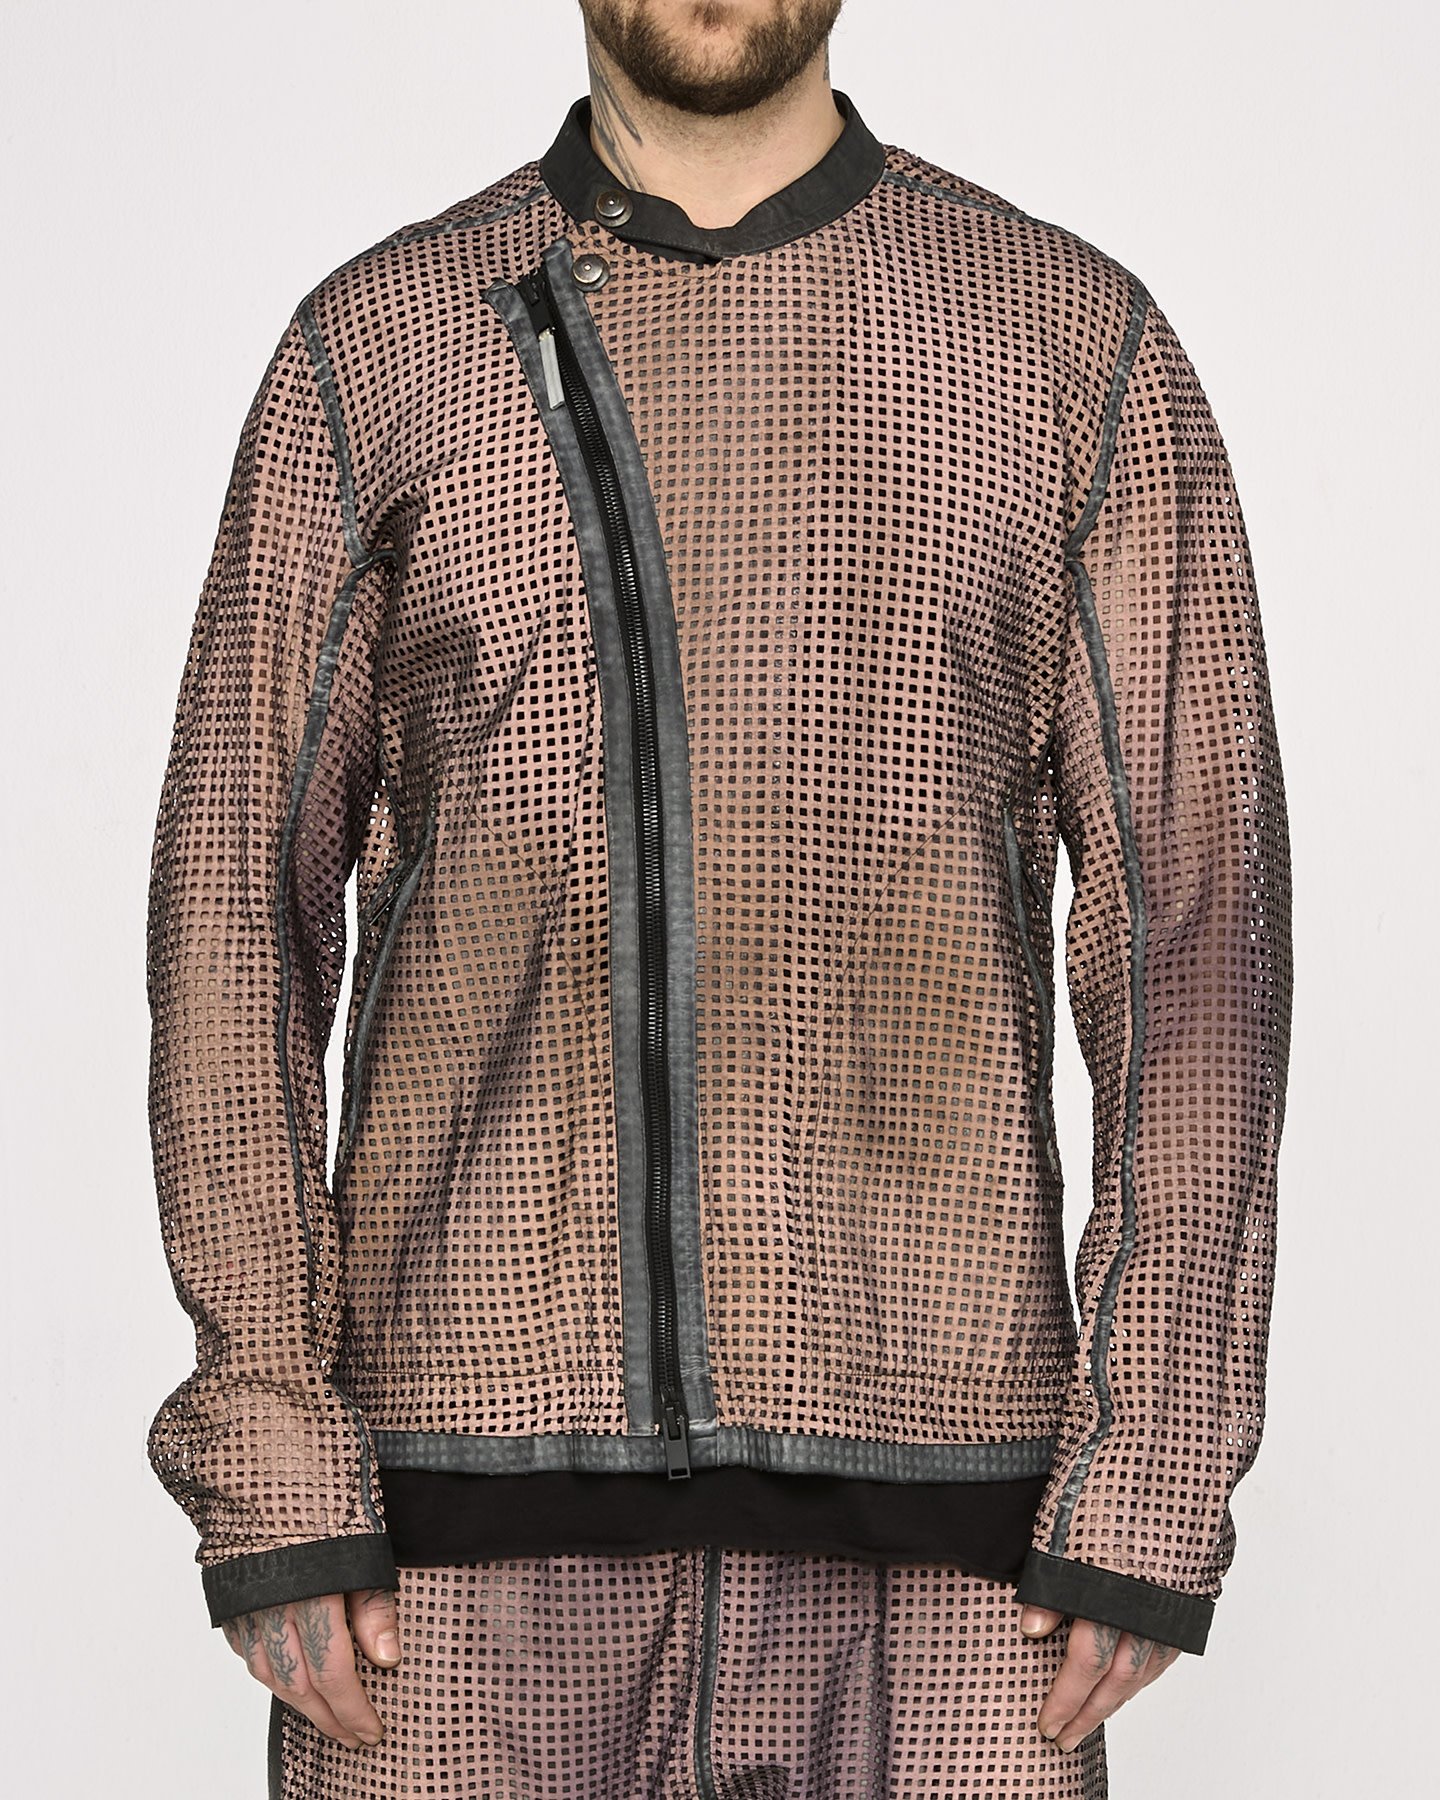 BUTE PERFORATED REFLECTIVE LEATHER JACKET - COPPER